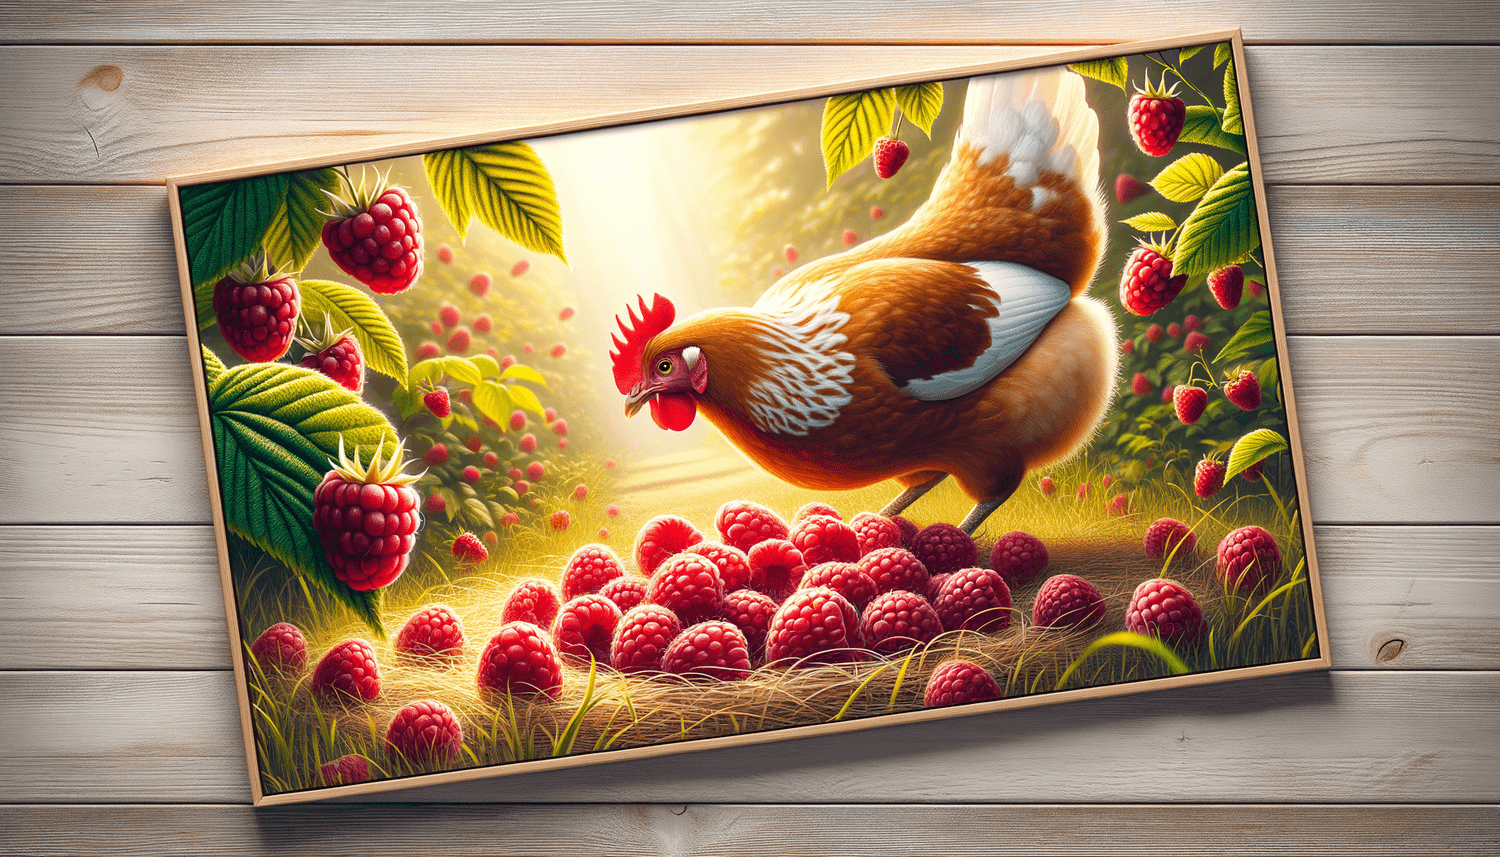 Can Chickens Eat Raspberries?